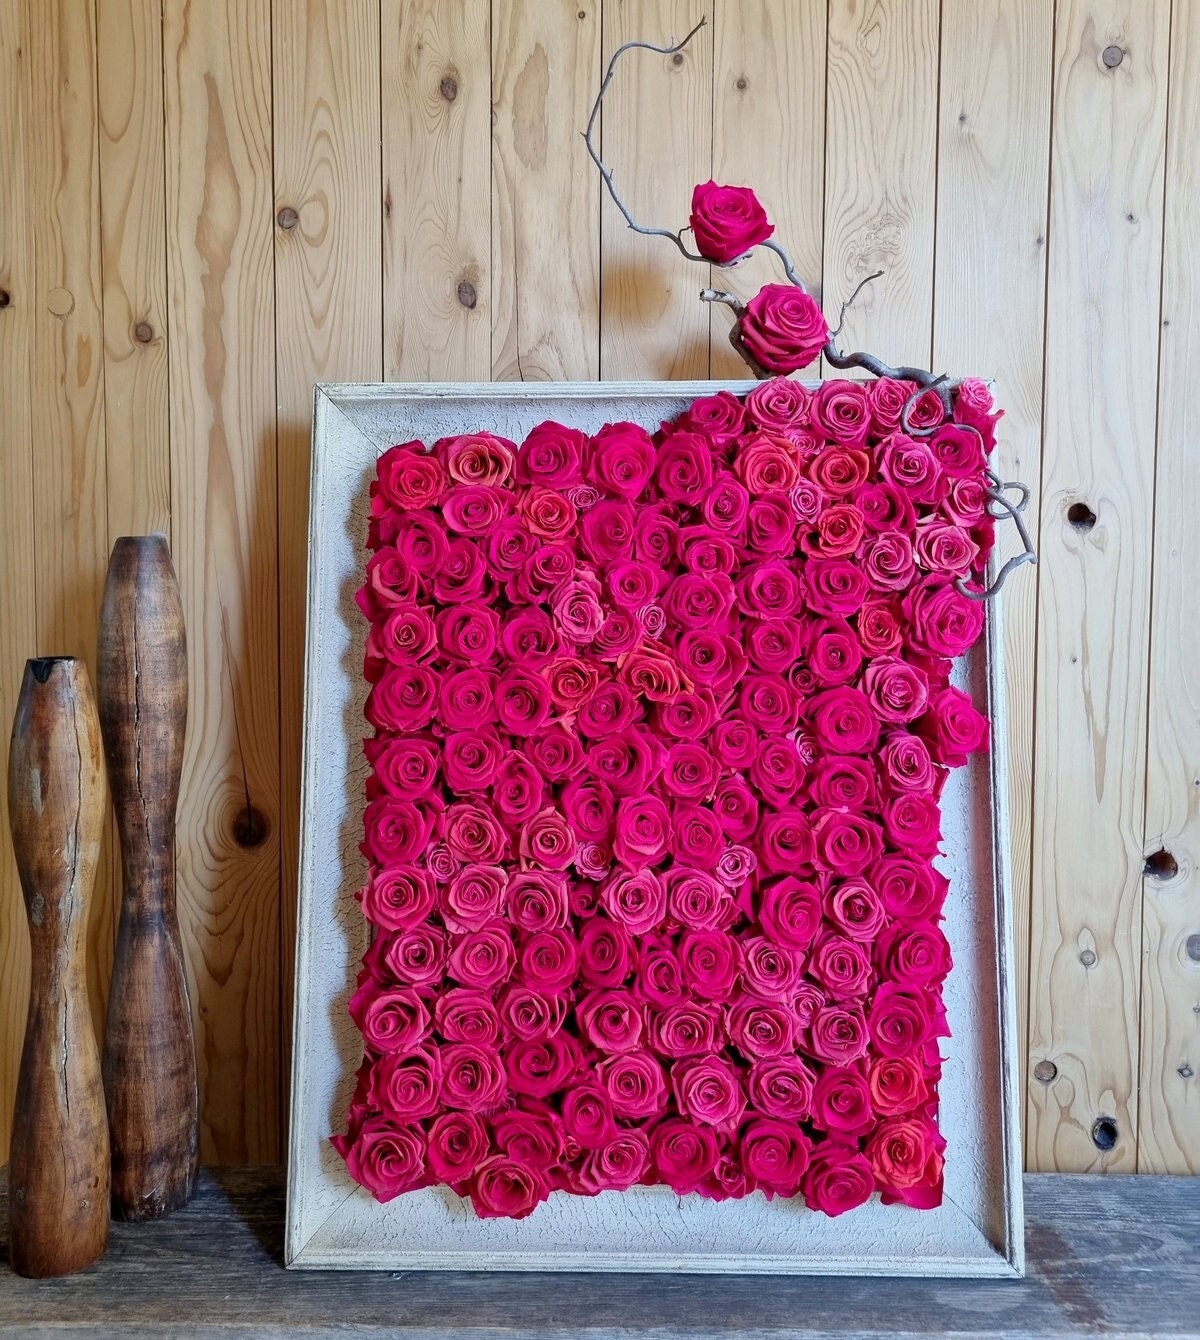 collections online Roses Framed Preserved Forever Wall of 42 preserved  natural That roses. Heart Of large Real - format Large Last for this unique  eternal floral painting model. timeless gifts. love 